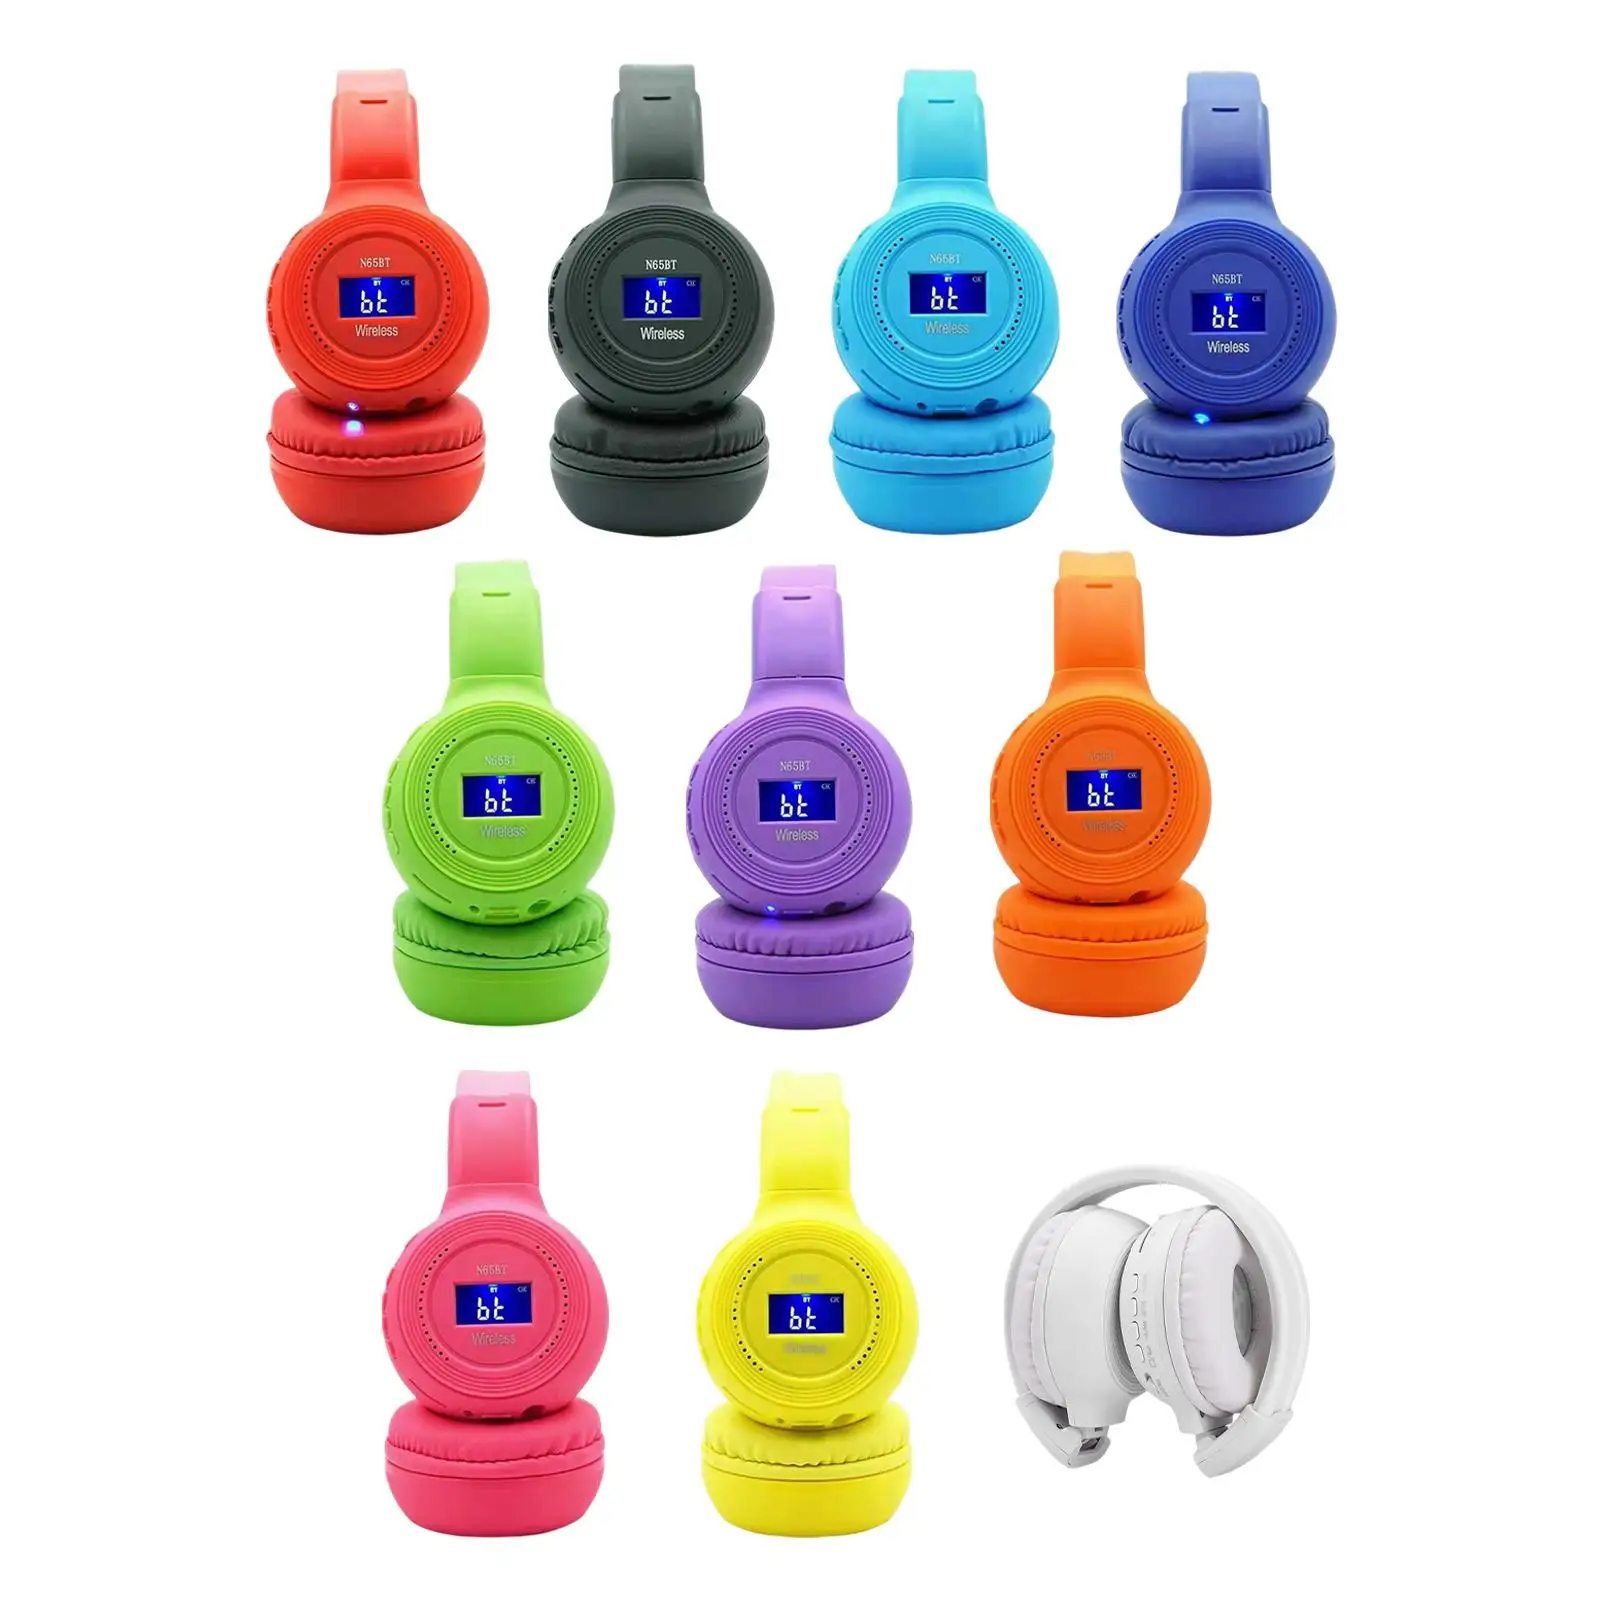 Wireless Earphone with LCD Display Bluetooth 5.0 for Computer Sports Laptops